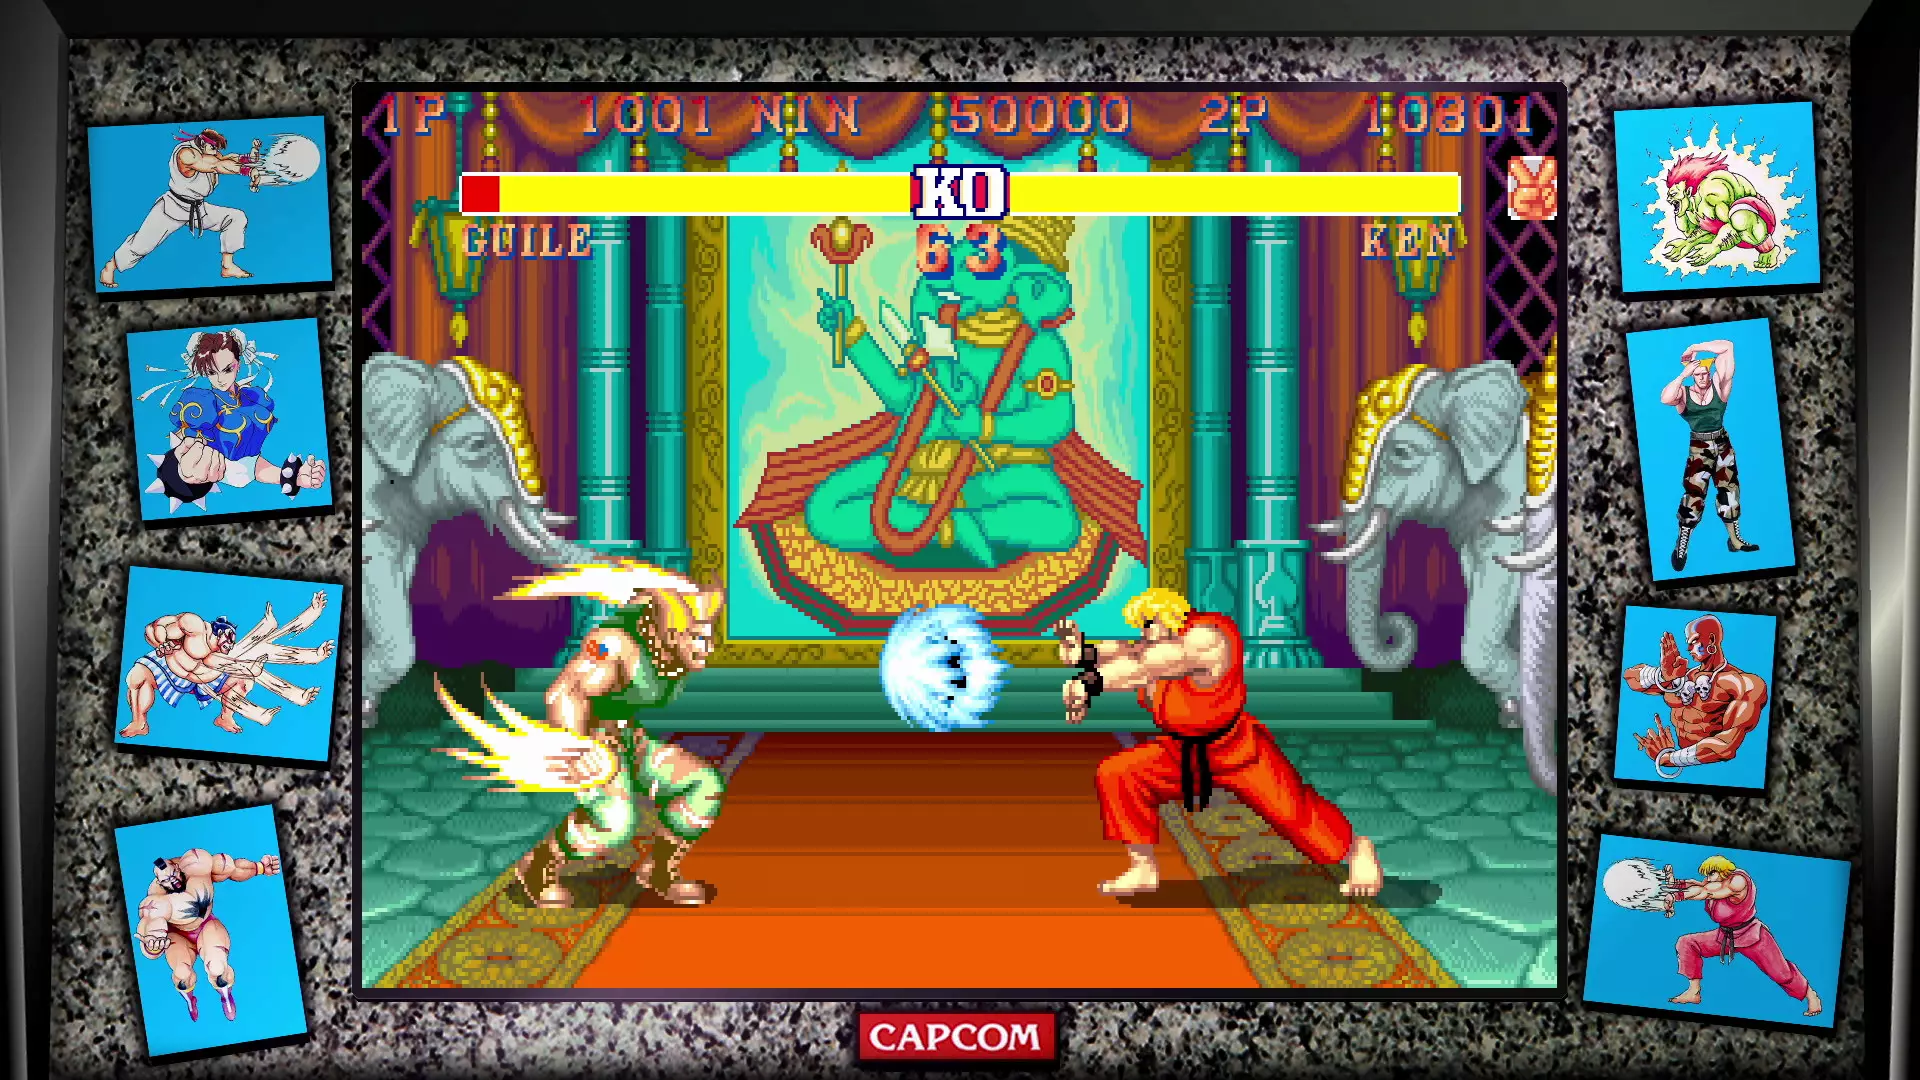 Street Fighter II as part of the Street Fighter 30th Anniversary Collection /